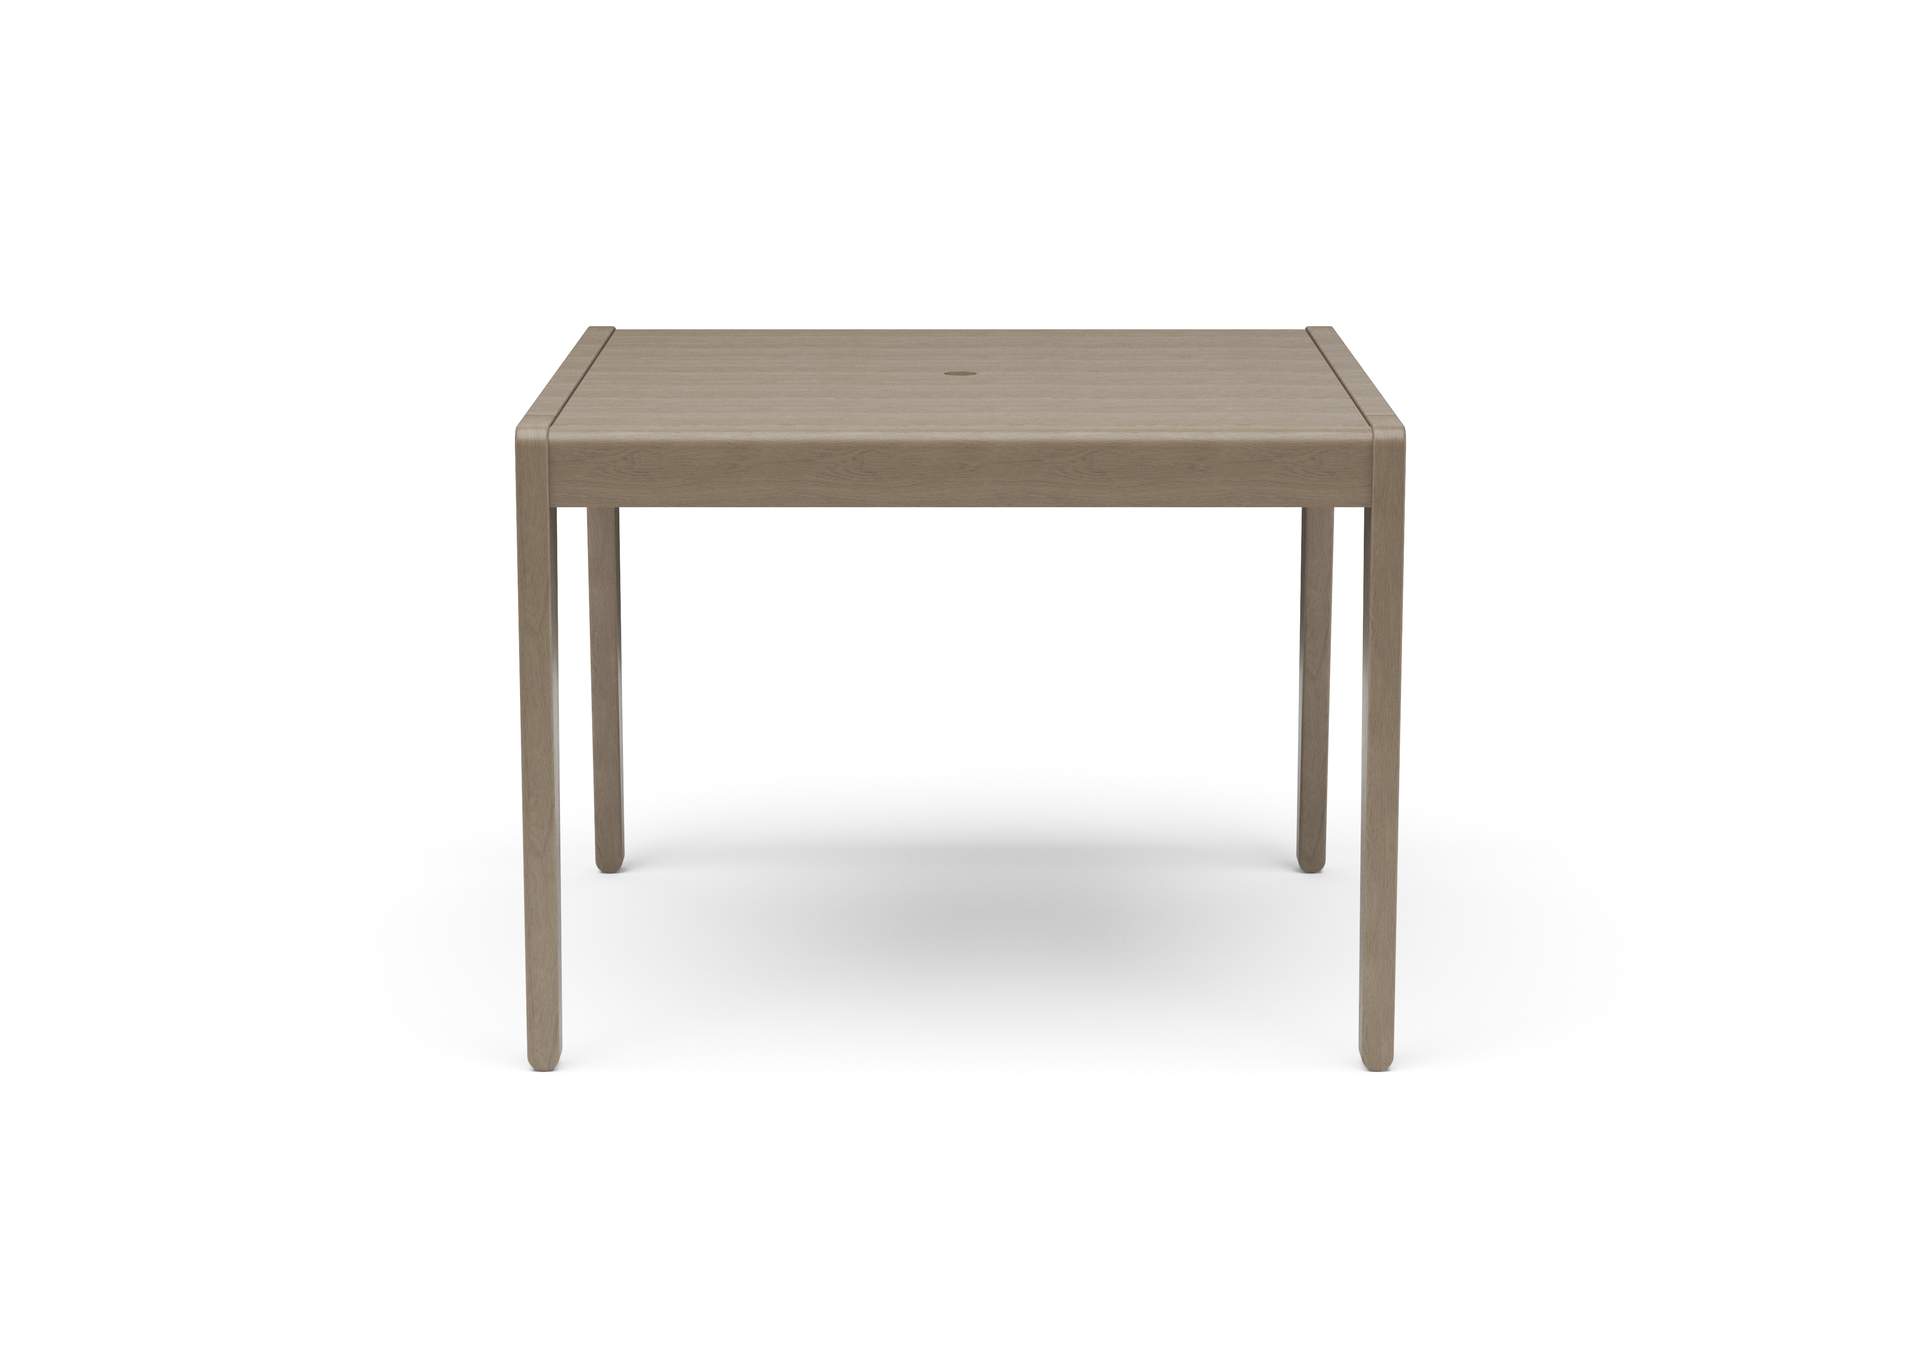 Sustain Outdoor Dining Table By Homestyles,Homestyles